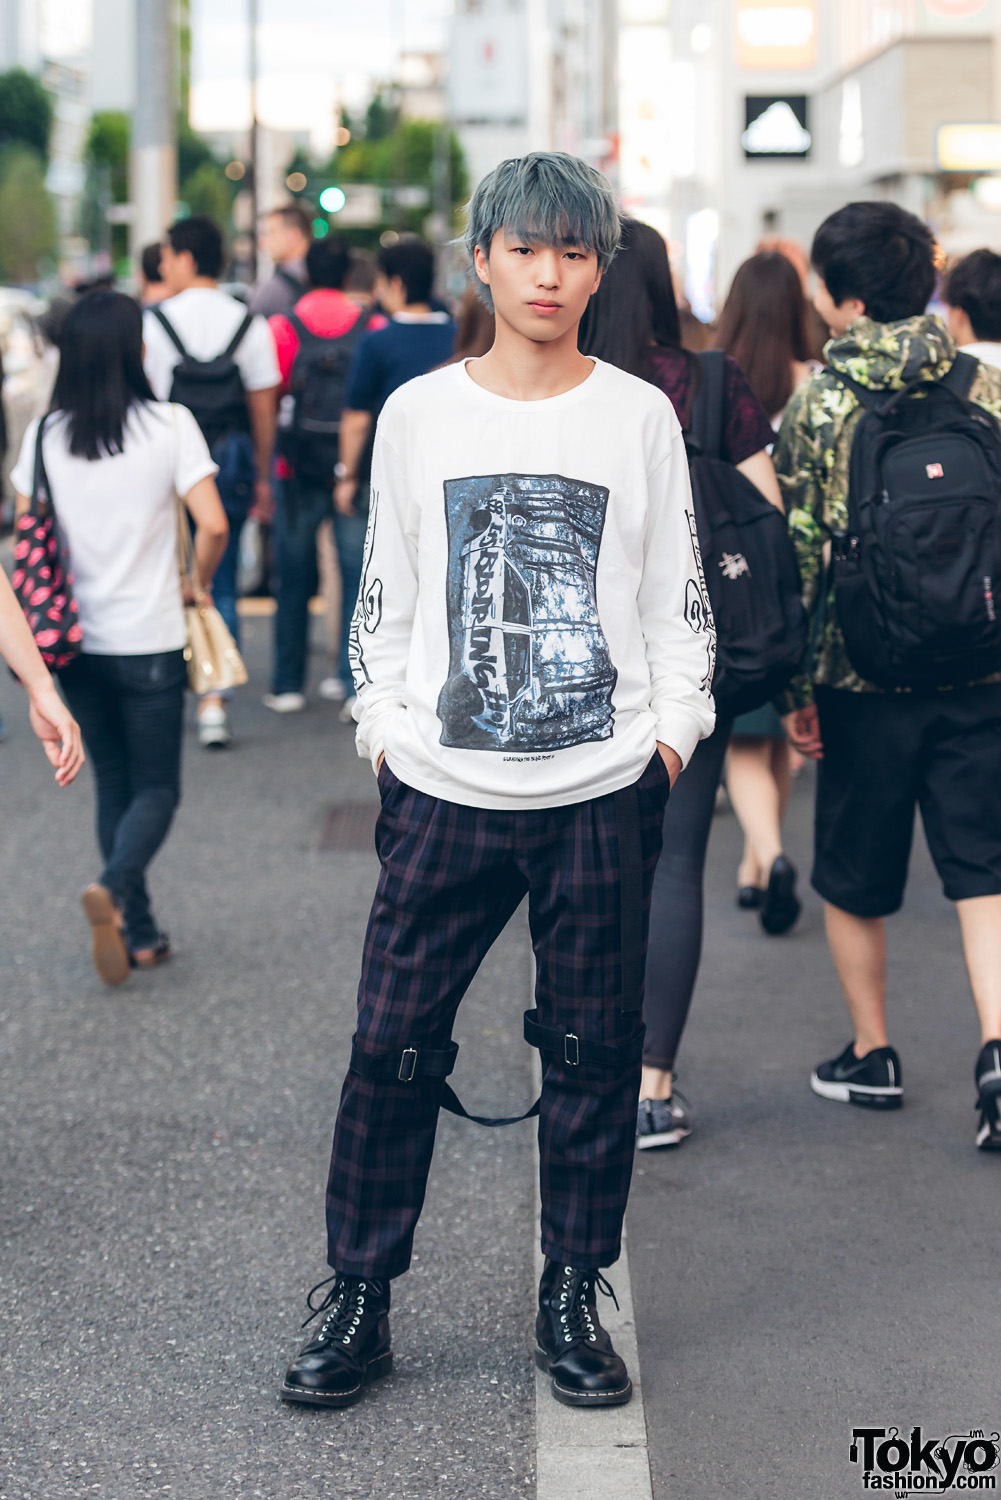 Grey-Haired Harajuku Guy Street Style w/ Sprout 2nd, Dr. Martens & Punk Leg Straps